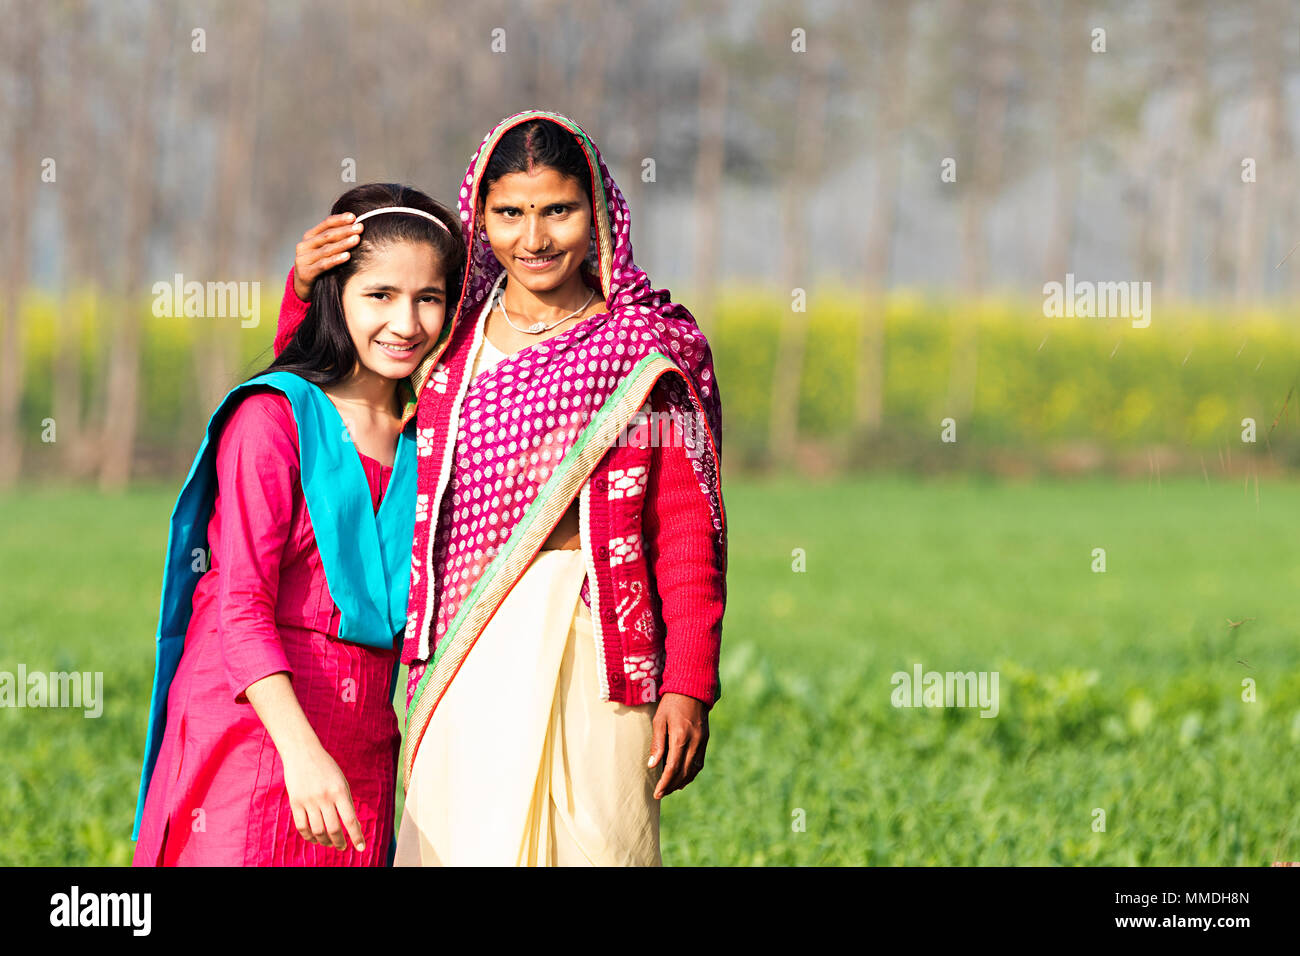 Smiling Caring Rural Mother And Teenage Girl Standing In-Farm Village Stock Photo